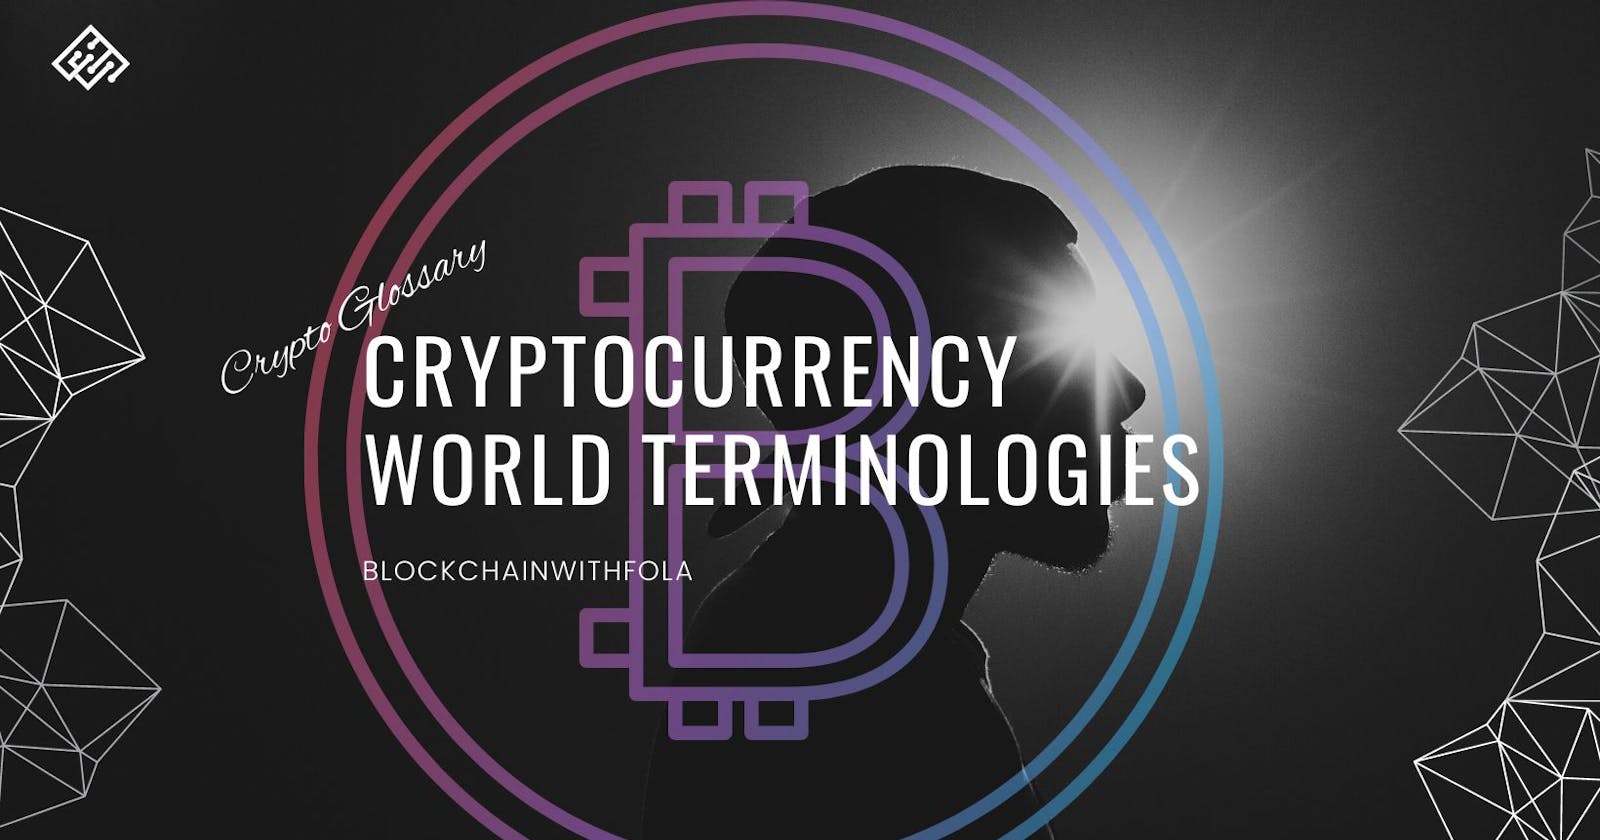 Crypto Glossary: 36 CRYPTOCURRENCY WORLD TERMINOLOGIES YOU SHOULD KNOW (PART 1)